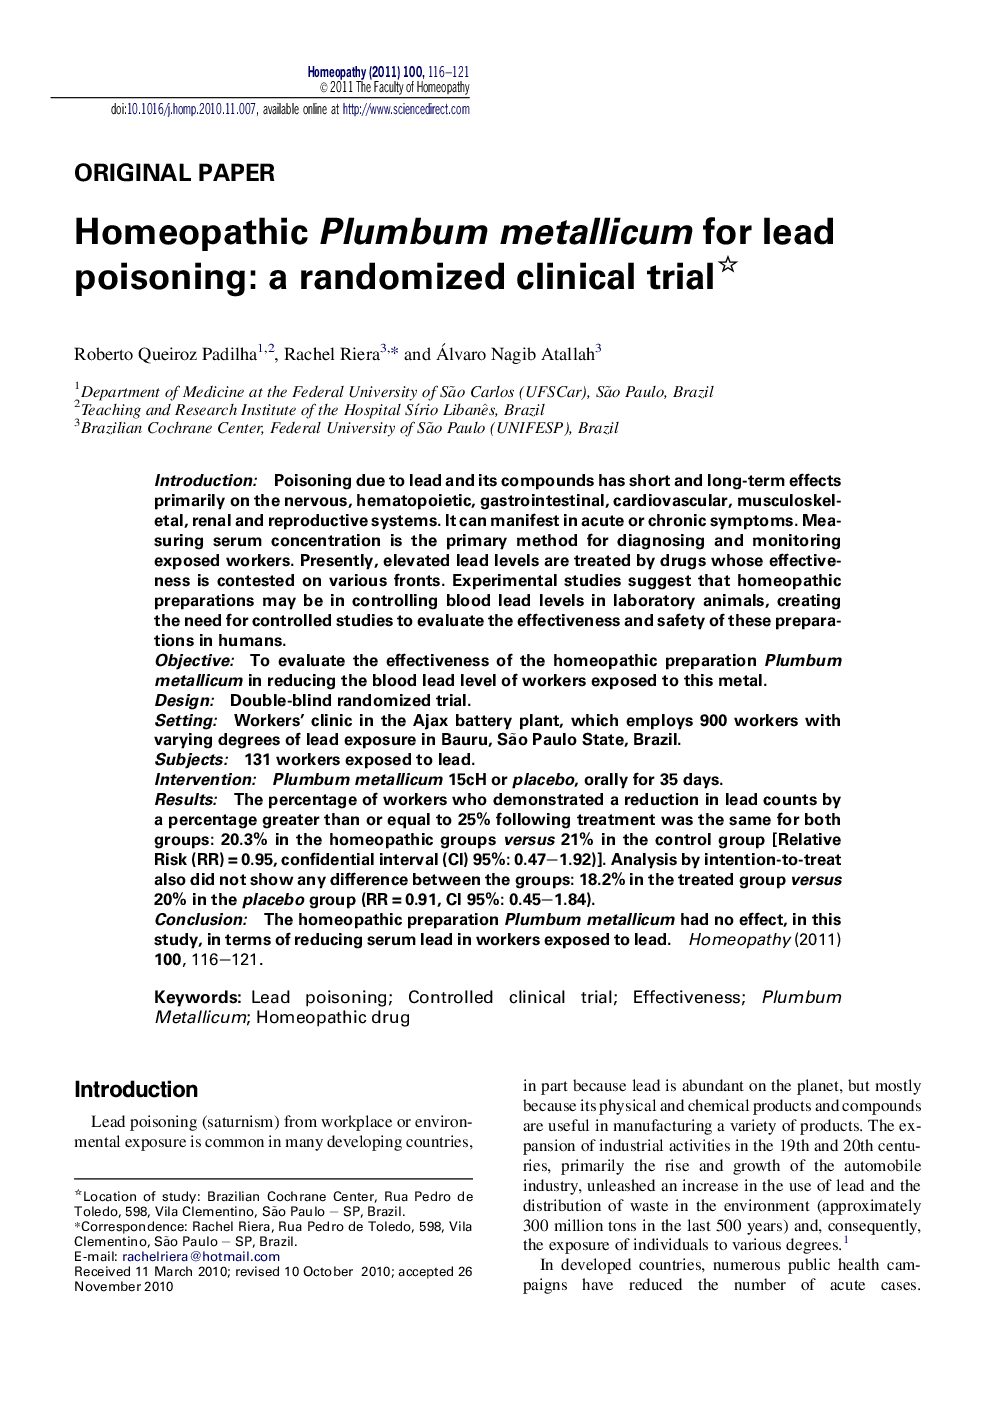 Homeopathic Plumbum metallicum for lead poisoning: a randomized clinical trial 